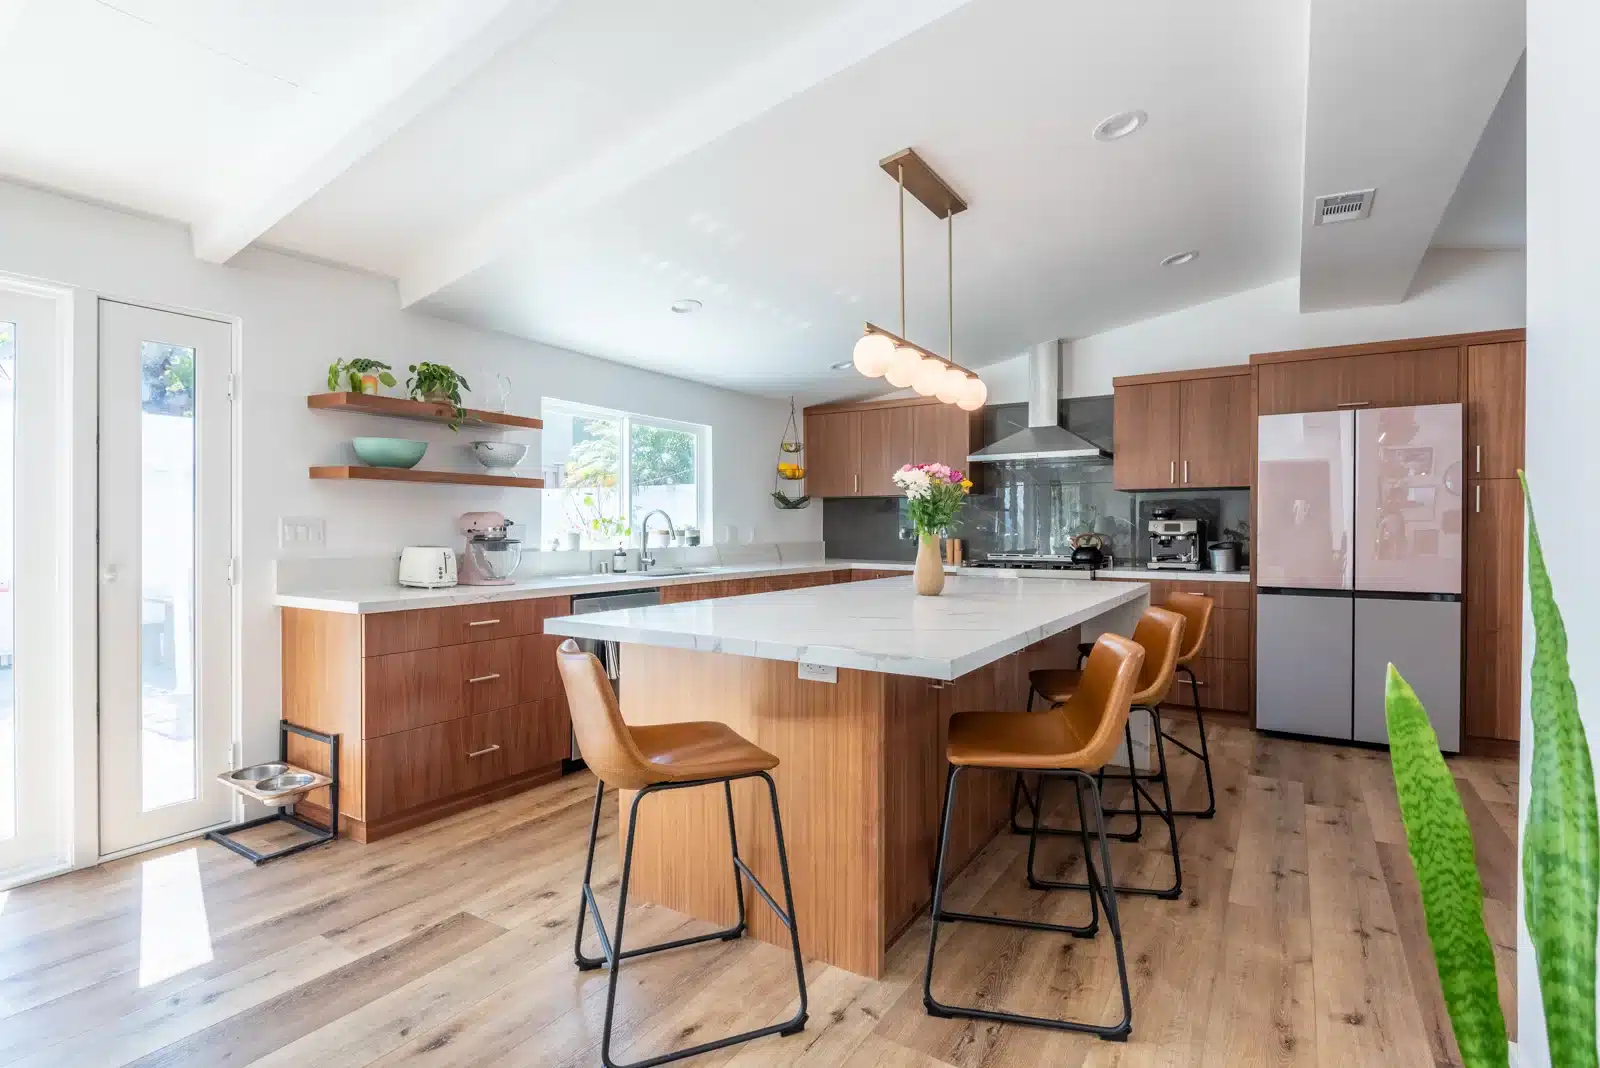 wood kitchen with vinyl flooring in home remodel in culver city